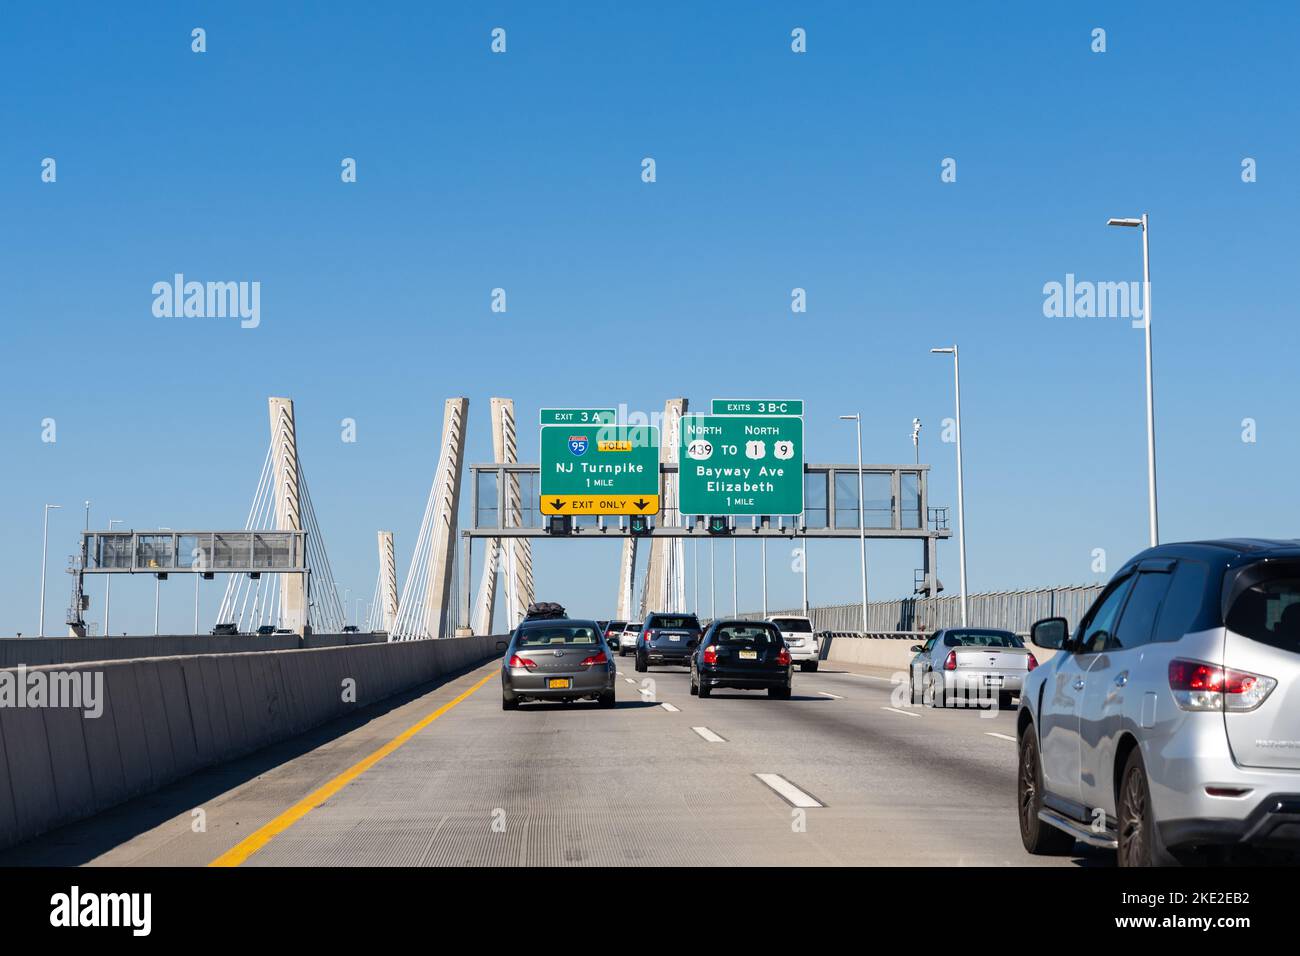 Staten Island, NY - Oct. 22, 2022: Exit 3 signs on I278 on the Goethals Bridge for I95 New Jersey Turnpike and 439 to Routes 1 and 9 toward Bayway Ave Stock Photo